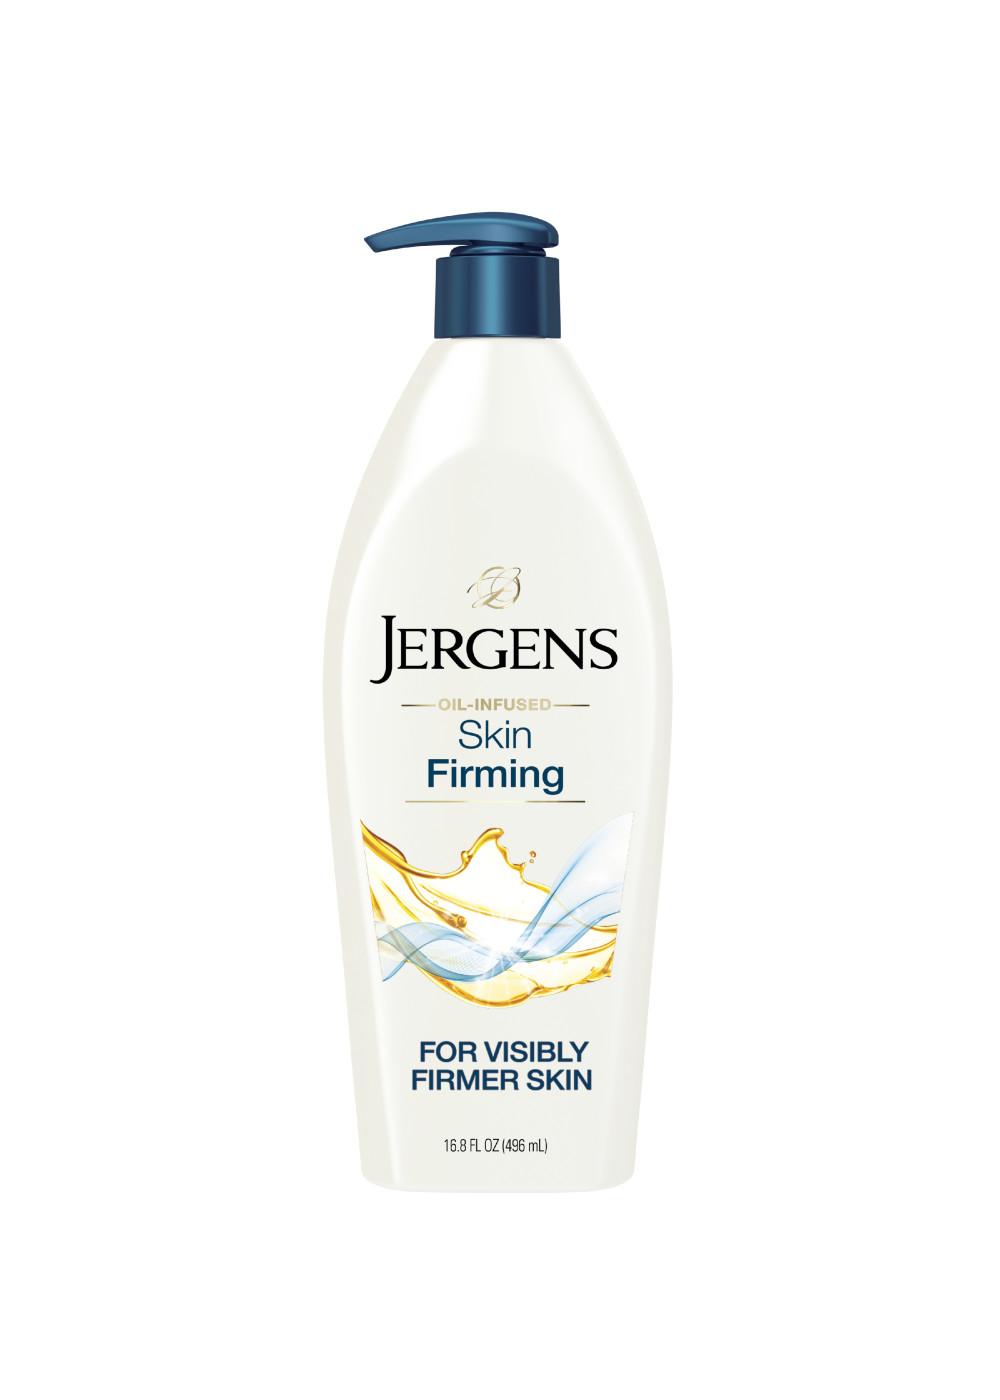 Jergens Skin Firming Body Lotion; image 1 of 8